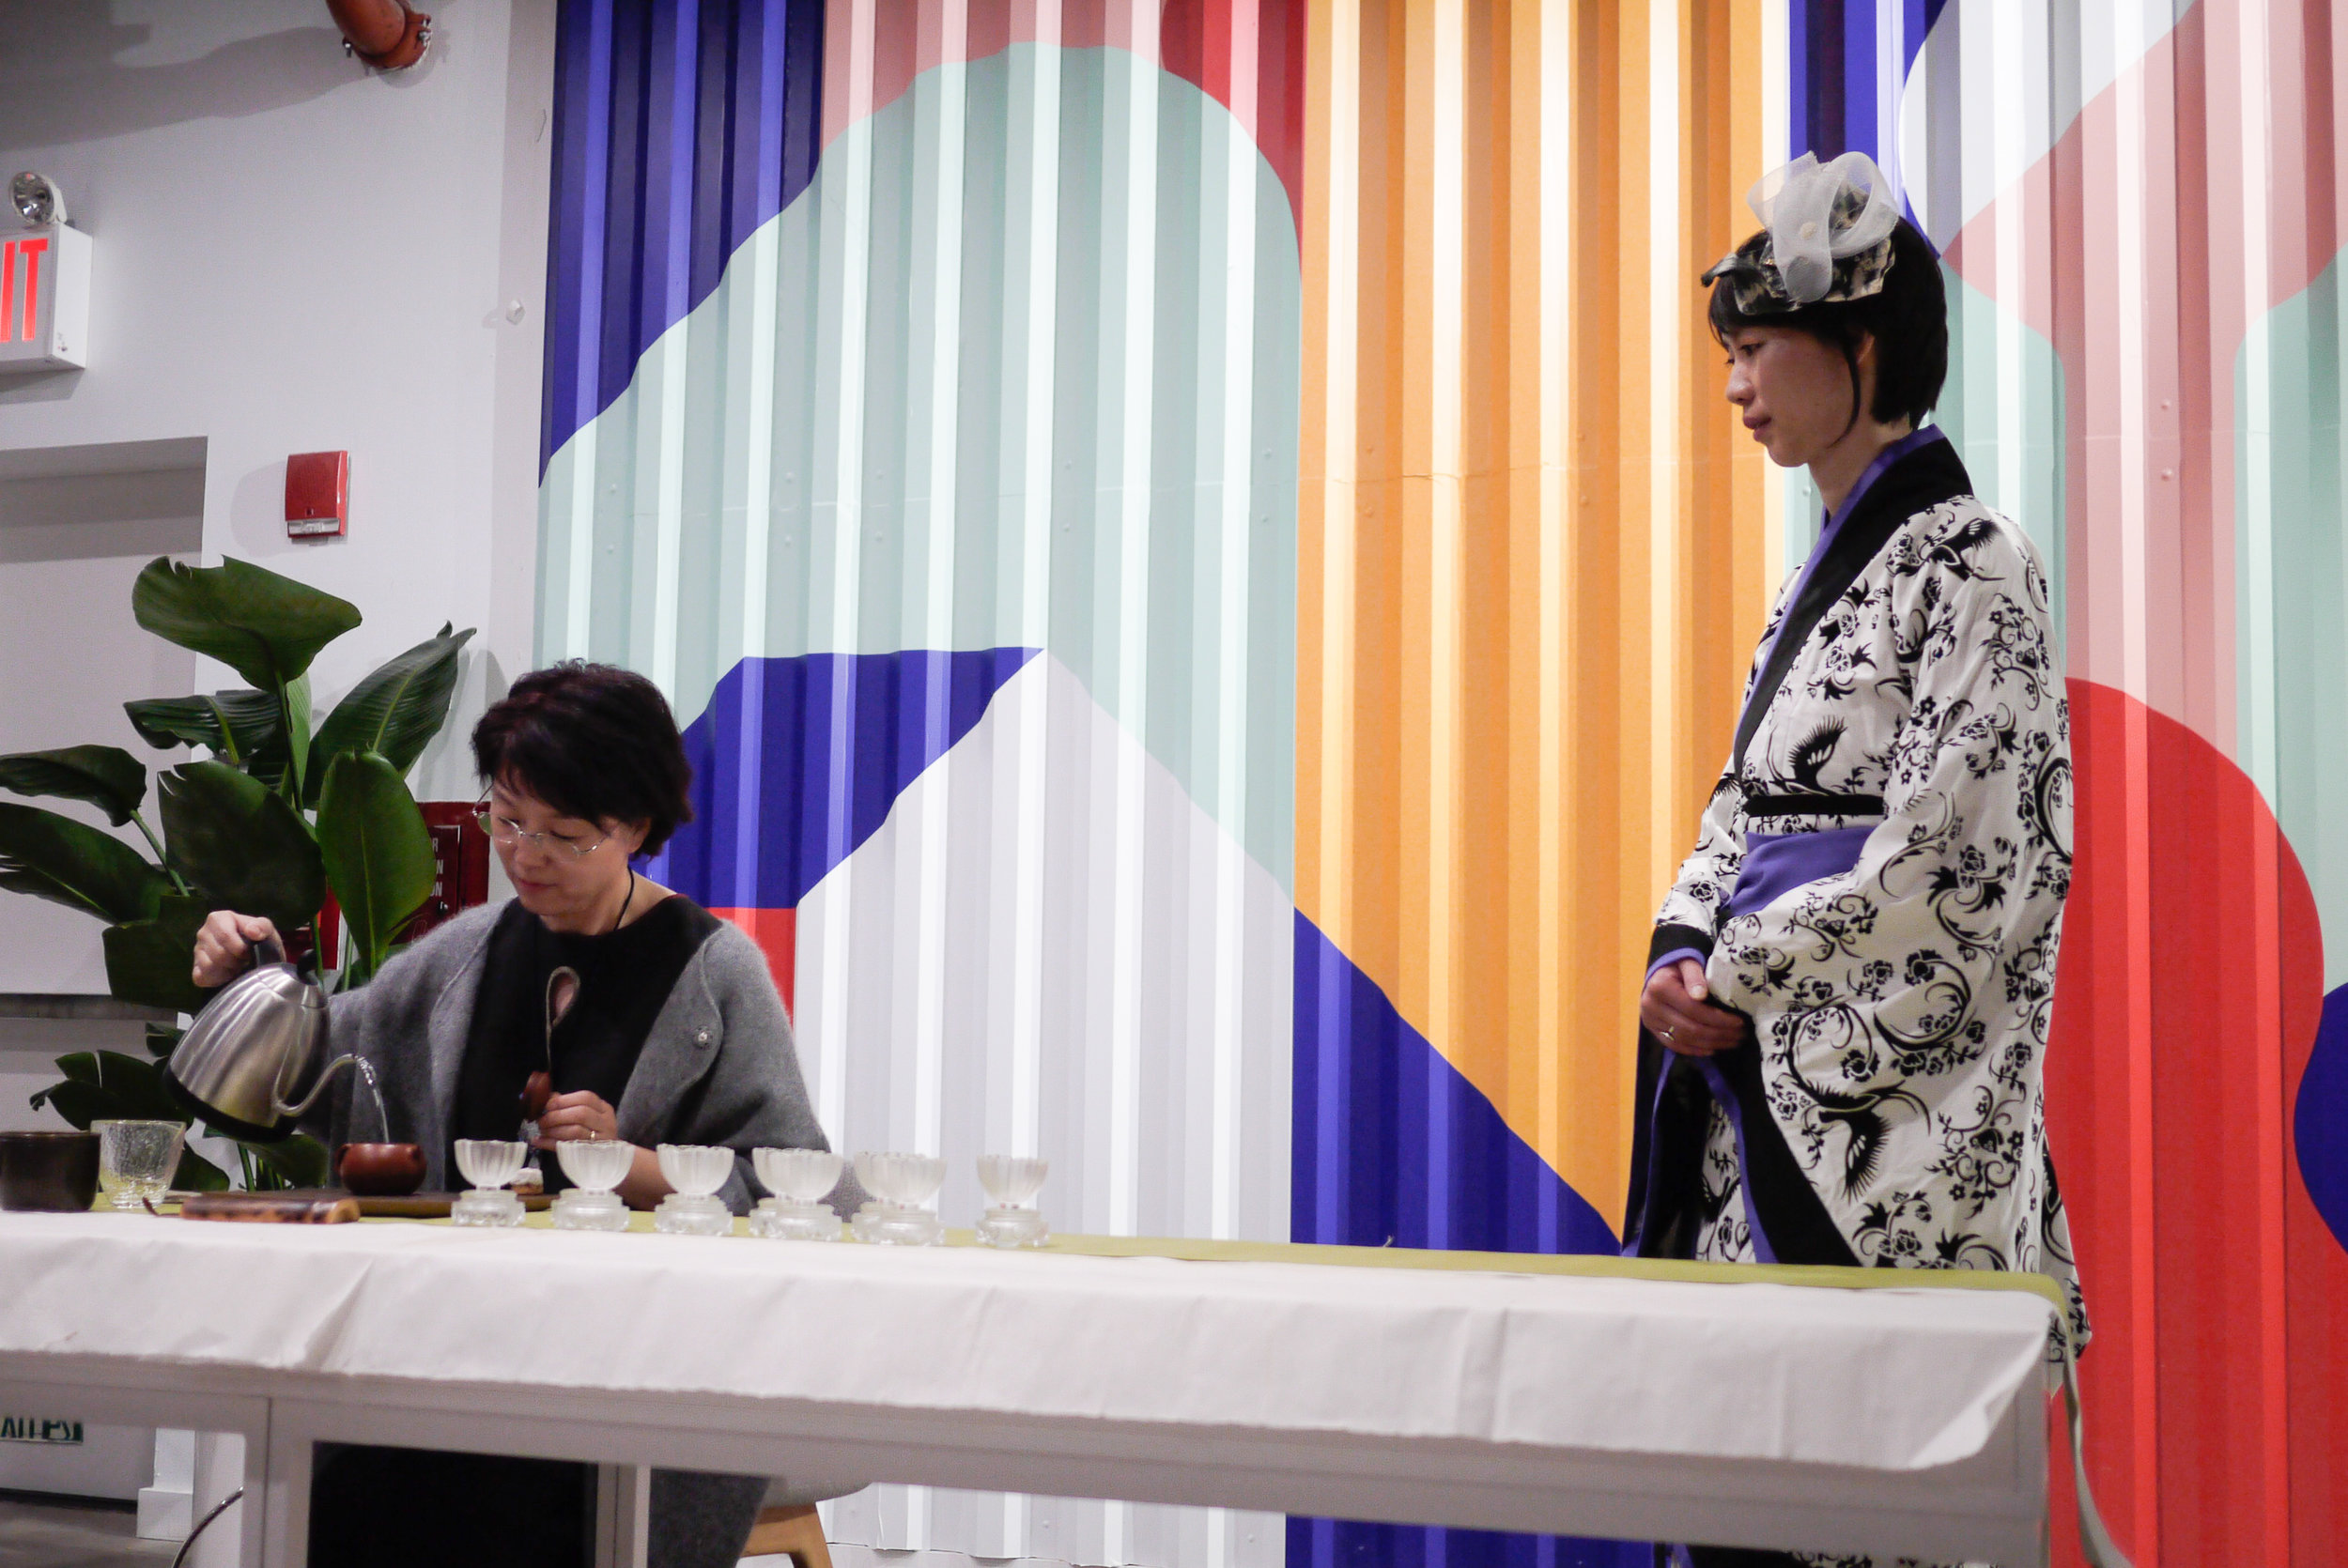  Tea Ceremony at Wix, photographed by Michele Fan 